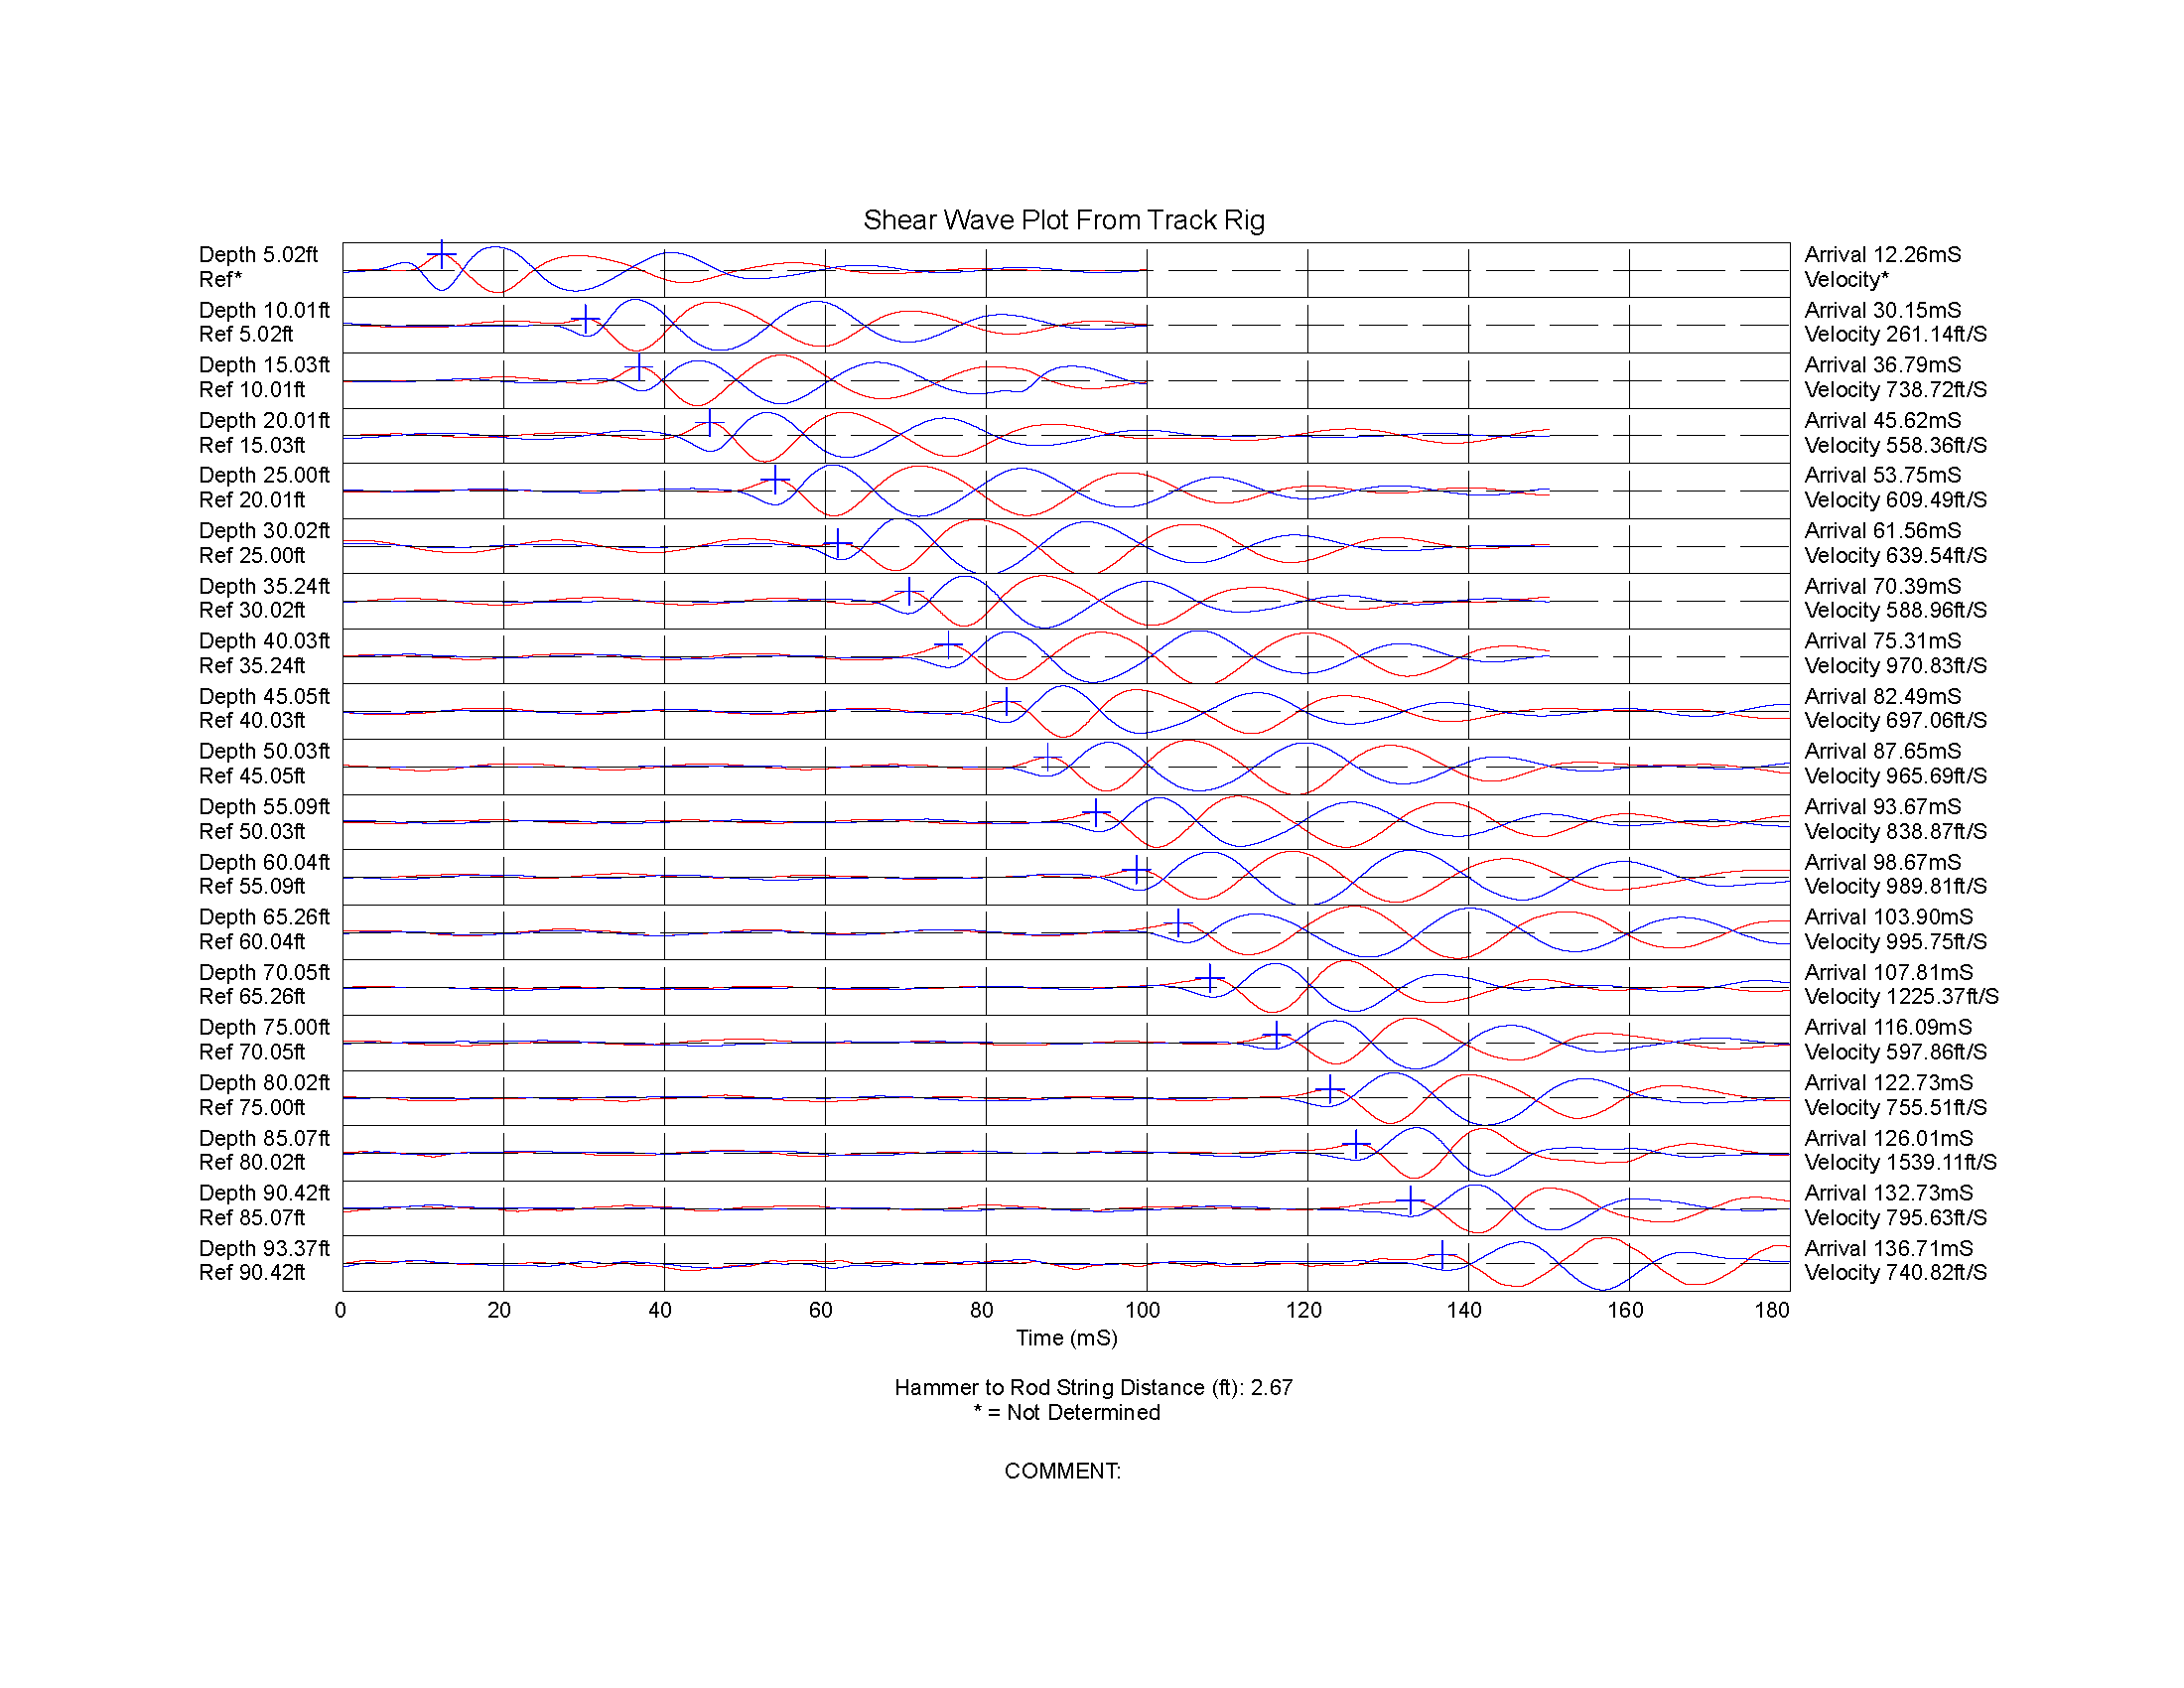 A chart of the time series for each time point.